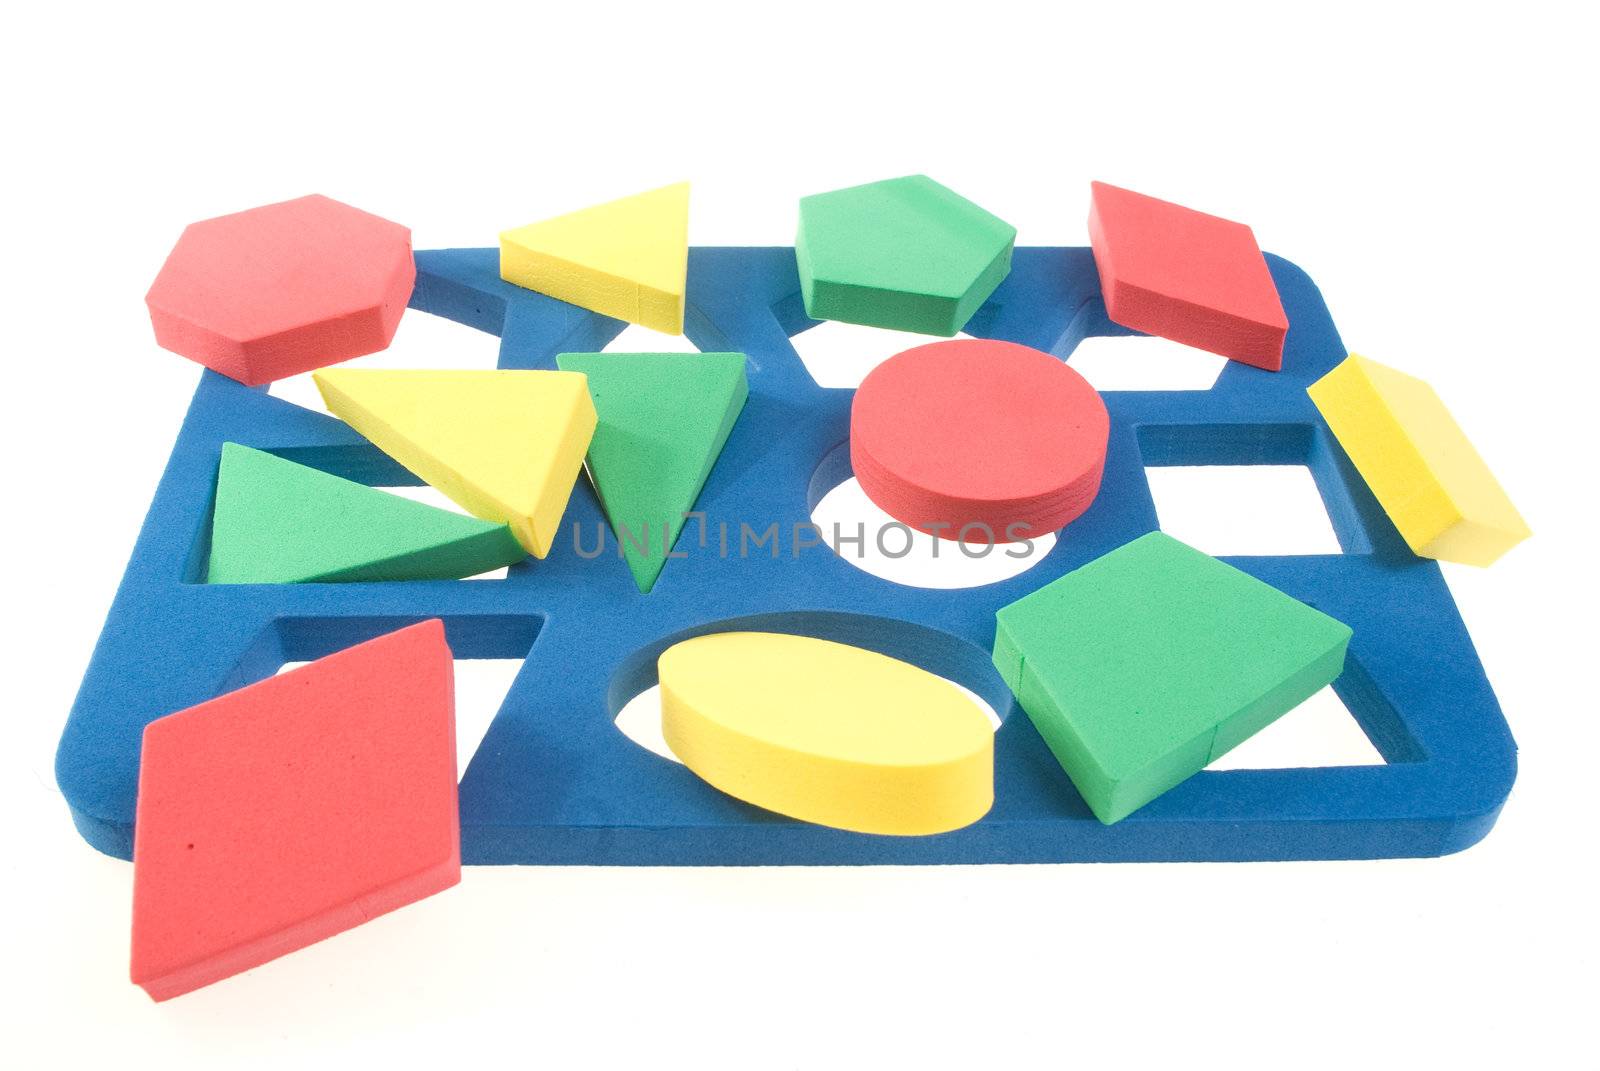 Children's developing game with color geometric shapes by BIG_TAU